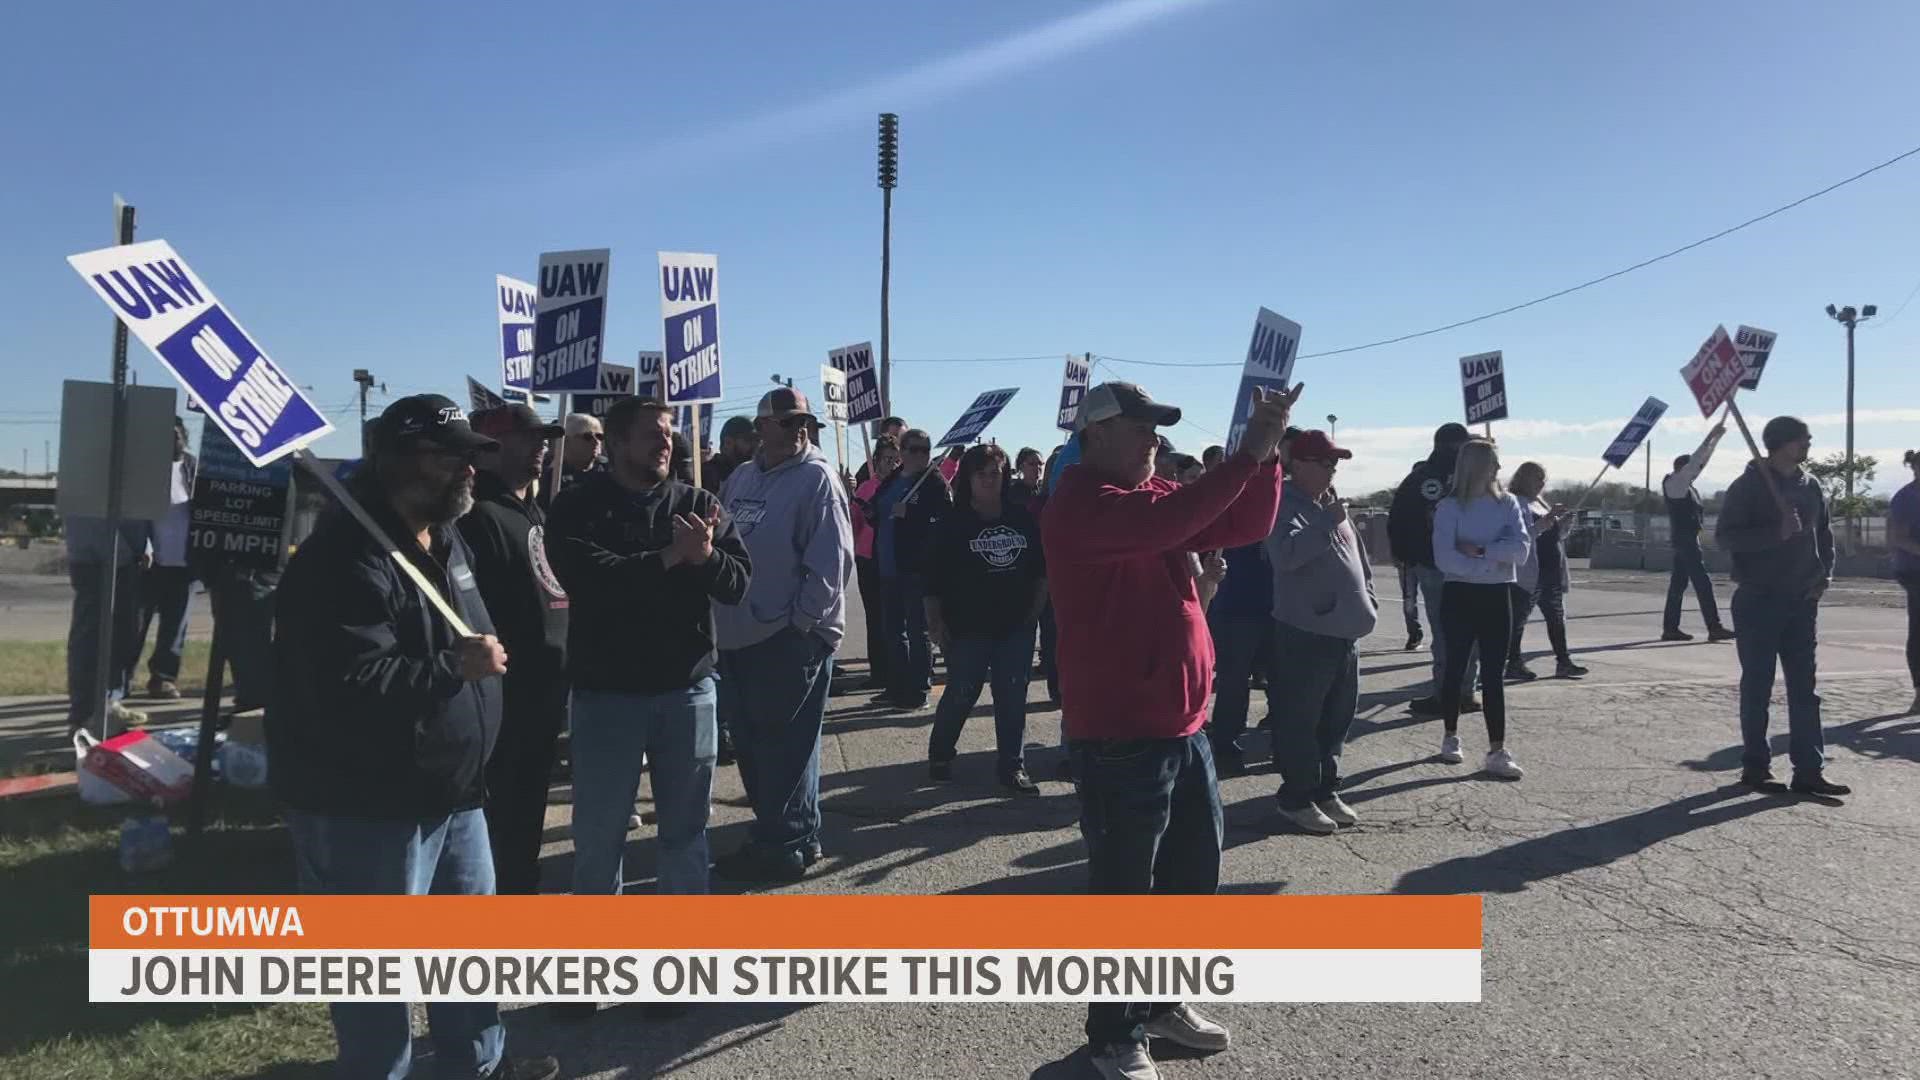 John Deere workers are on strike for the first time since 1986 after United Auto Workers members did not come to an agreement on a proposed contract Wednesday night.